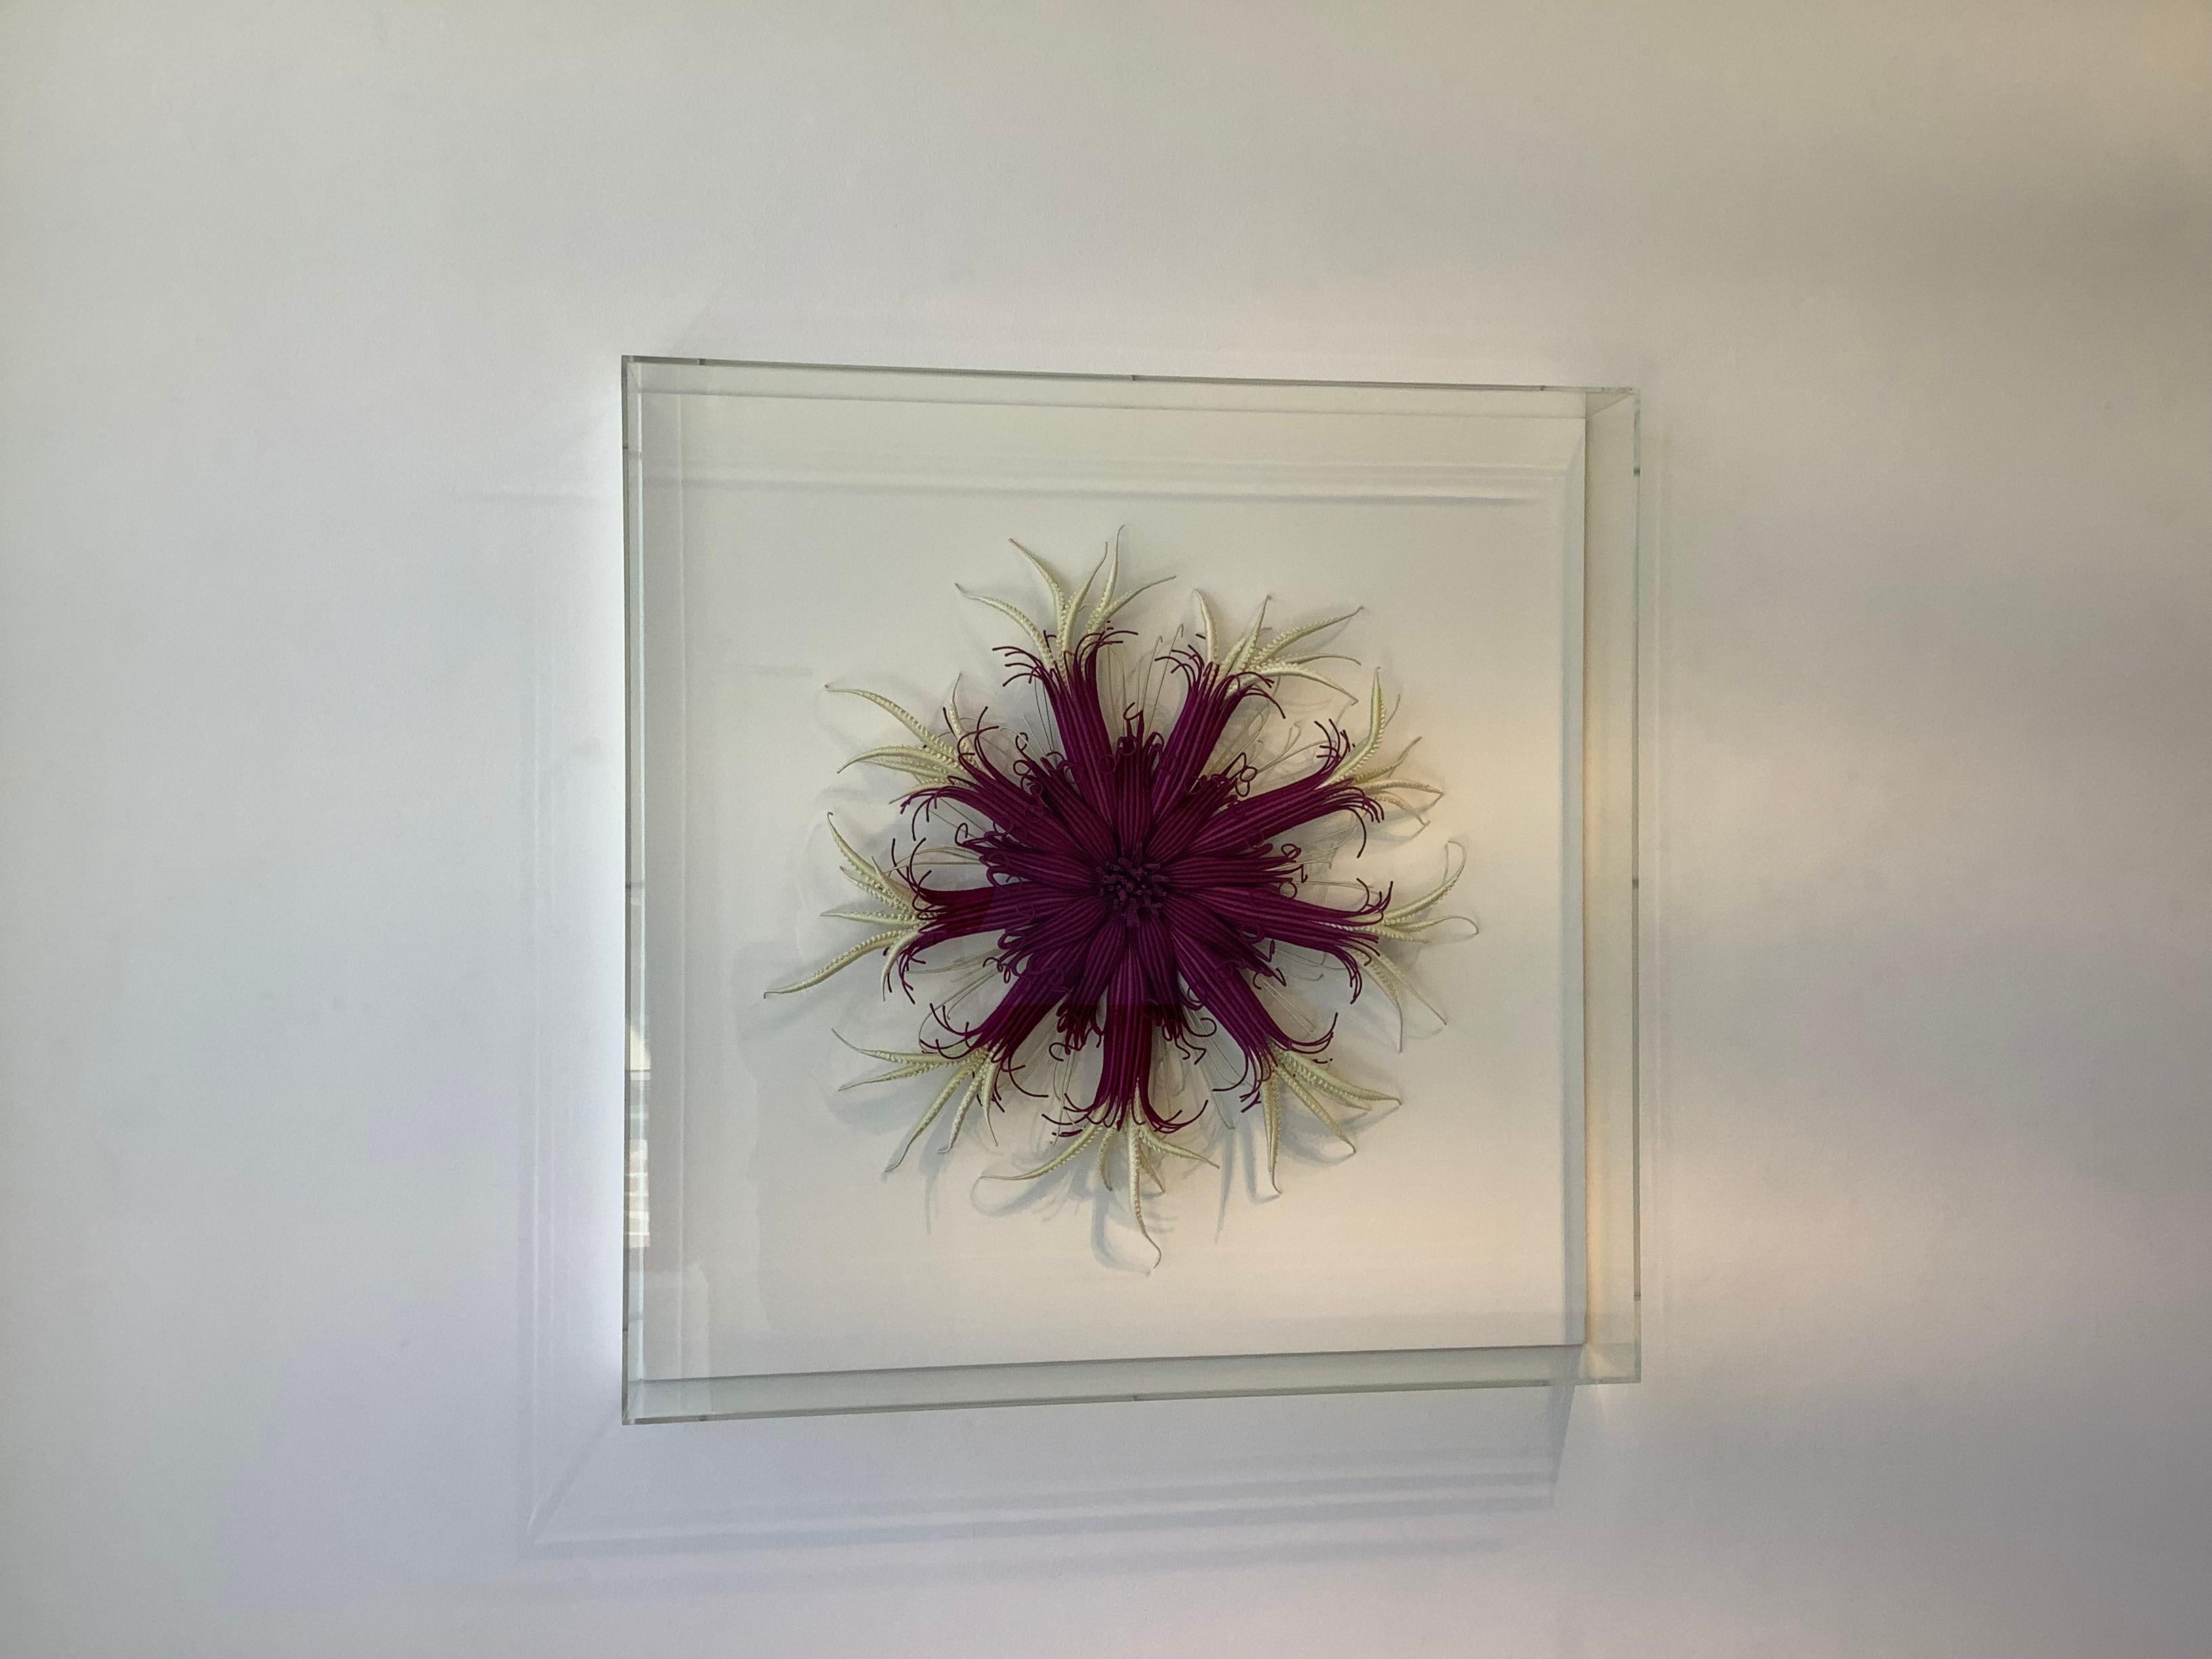 Framed in a clear acrylic shadowbox, Catherine Latson's Specimen Sixteen reads as an artistic rendition of a beautiful sea specimen. Rich, jewel-toned burgundy purple hand-dyed cotton thread is wrapped around tendrils that stretch from a delicate